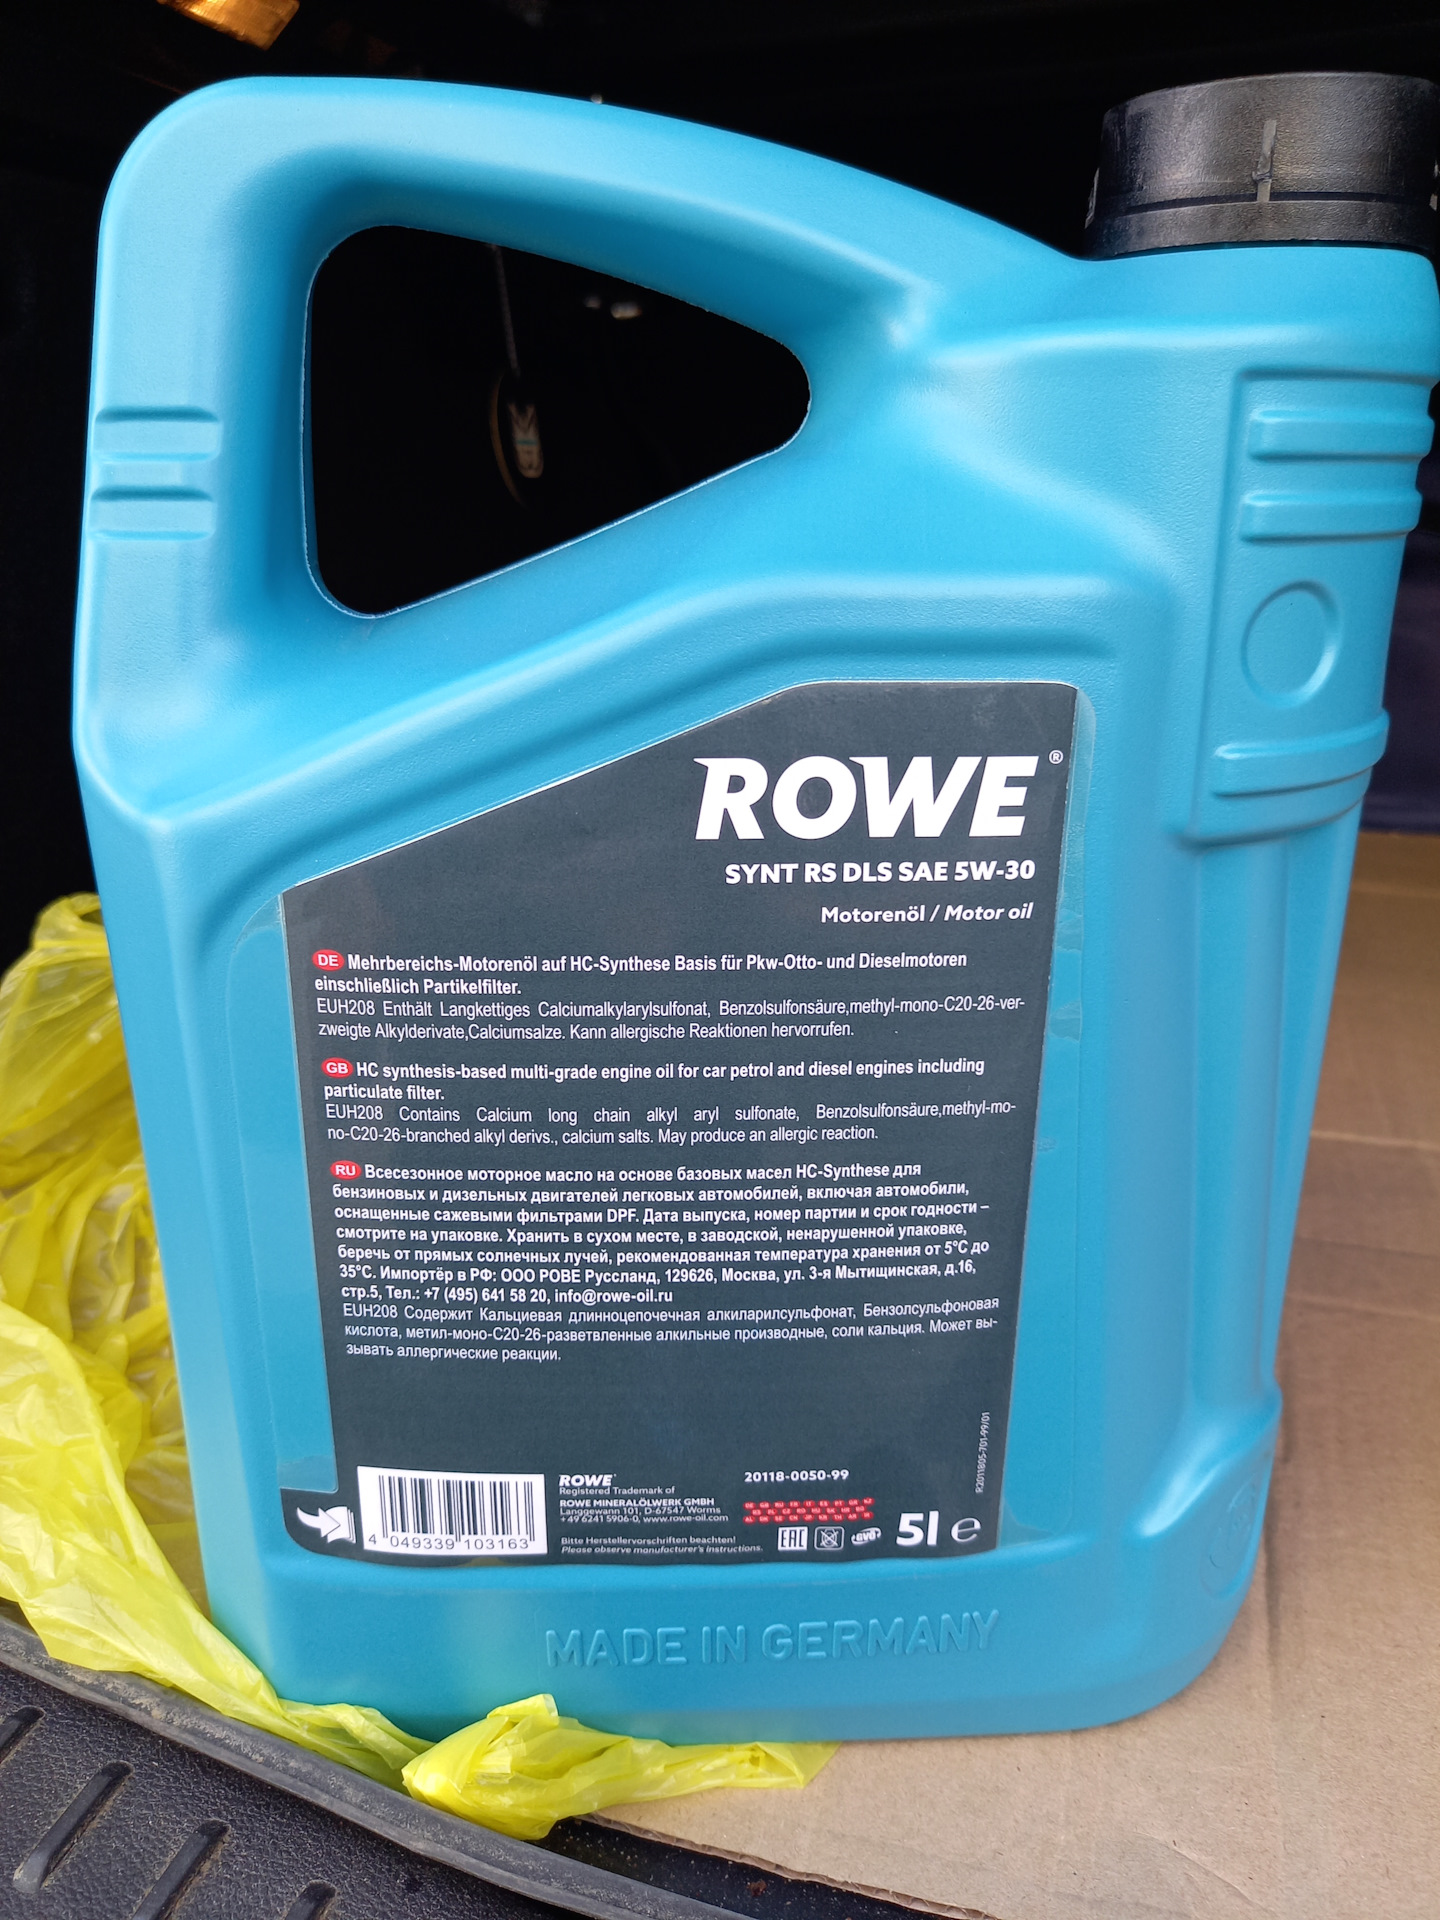 Rove масло. Rowe 5w30 a5/b5. Rowe 5w30 Synt. Rowe 5w30 Synt RS DLS. Rowe 5w40 RS.